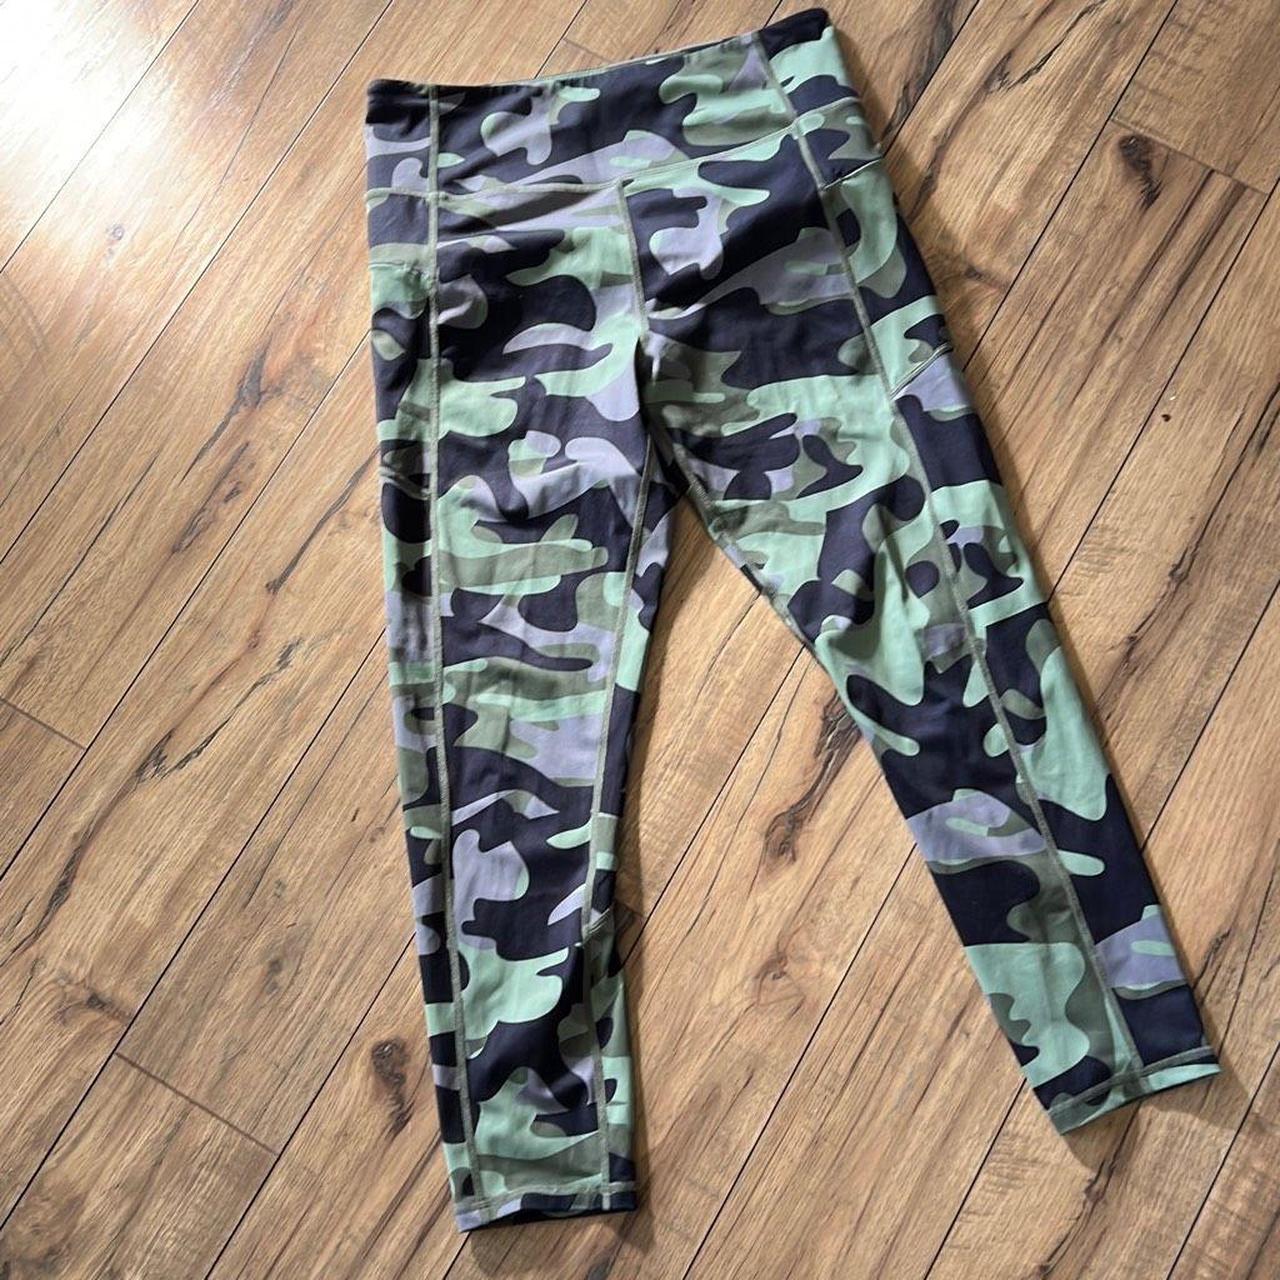 Zyia size 14-16 women's camouflage athletic work out - Depop